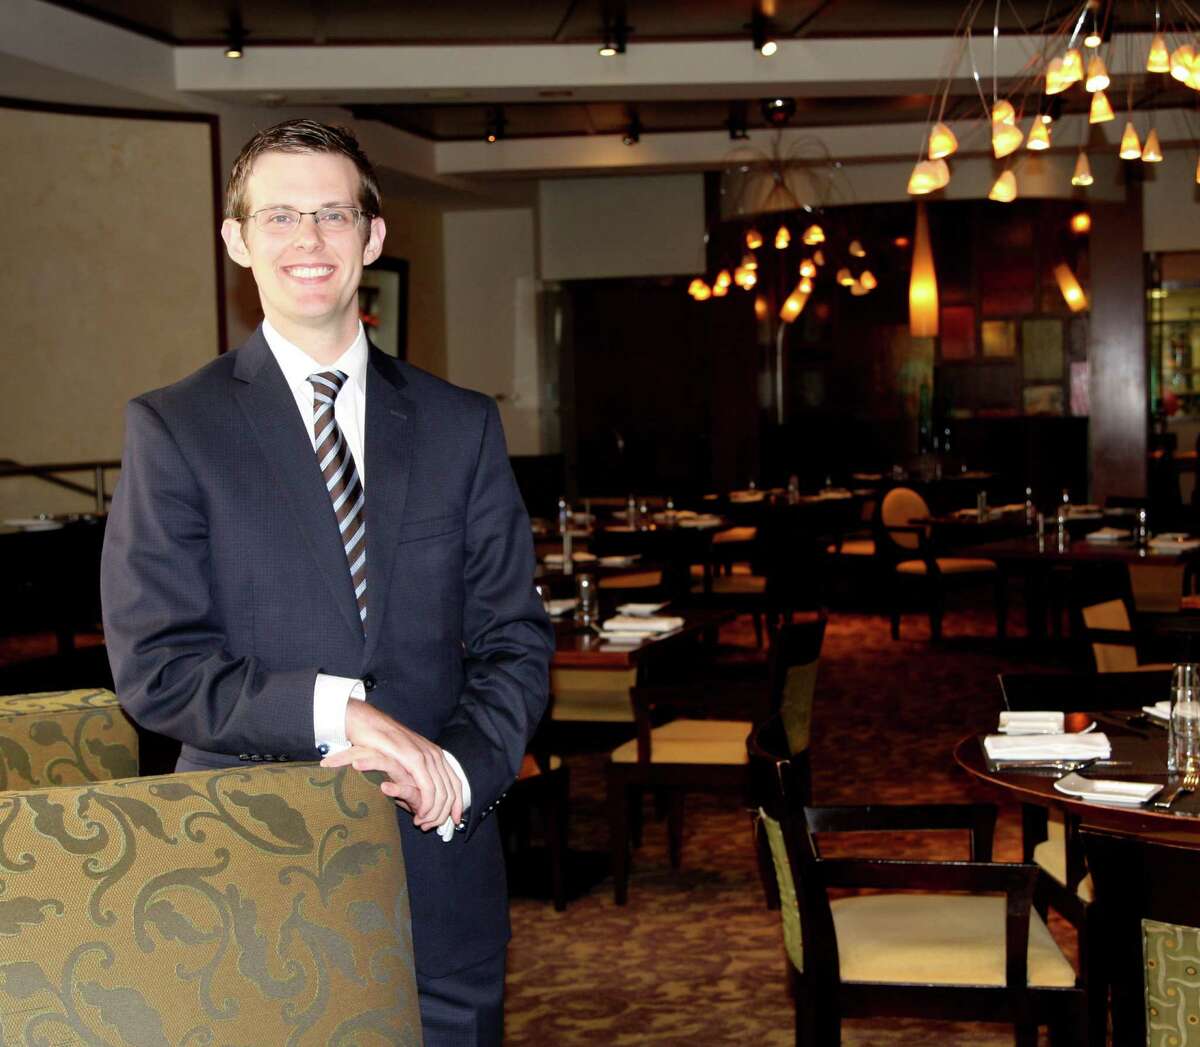 Cory Cuff, Food/Beverage manager at the Four Seasons Hotel.